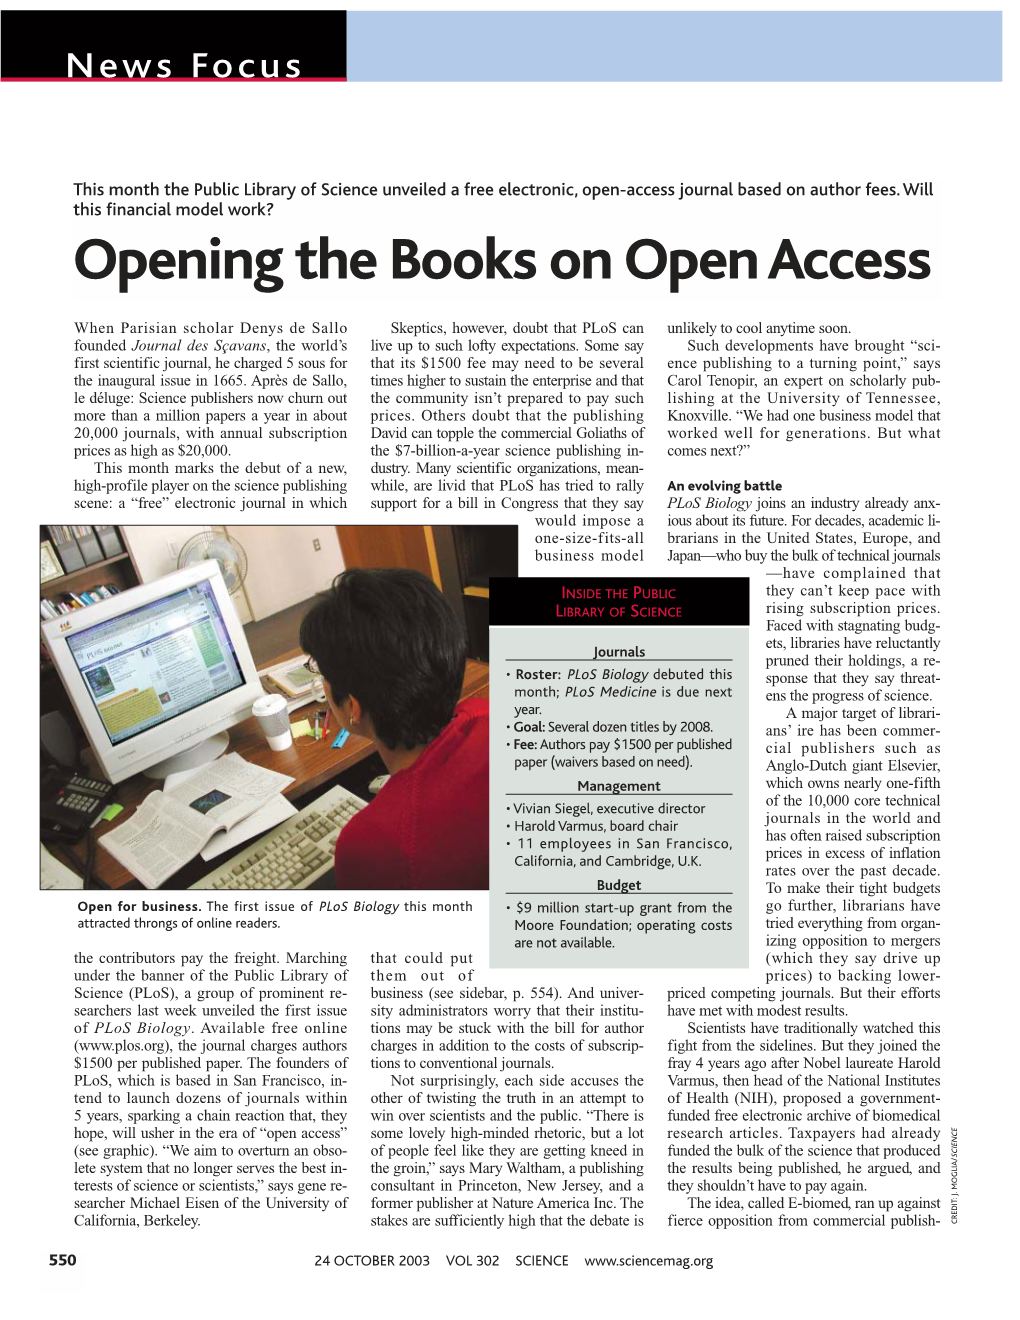 Opening the Books on Open Access